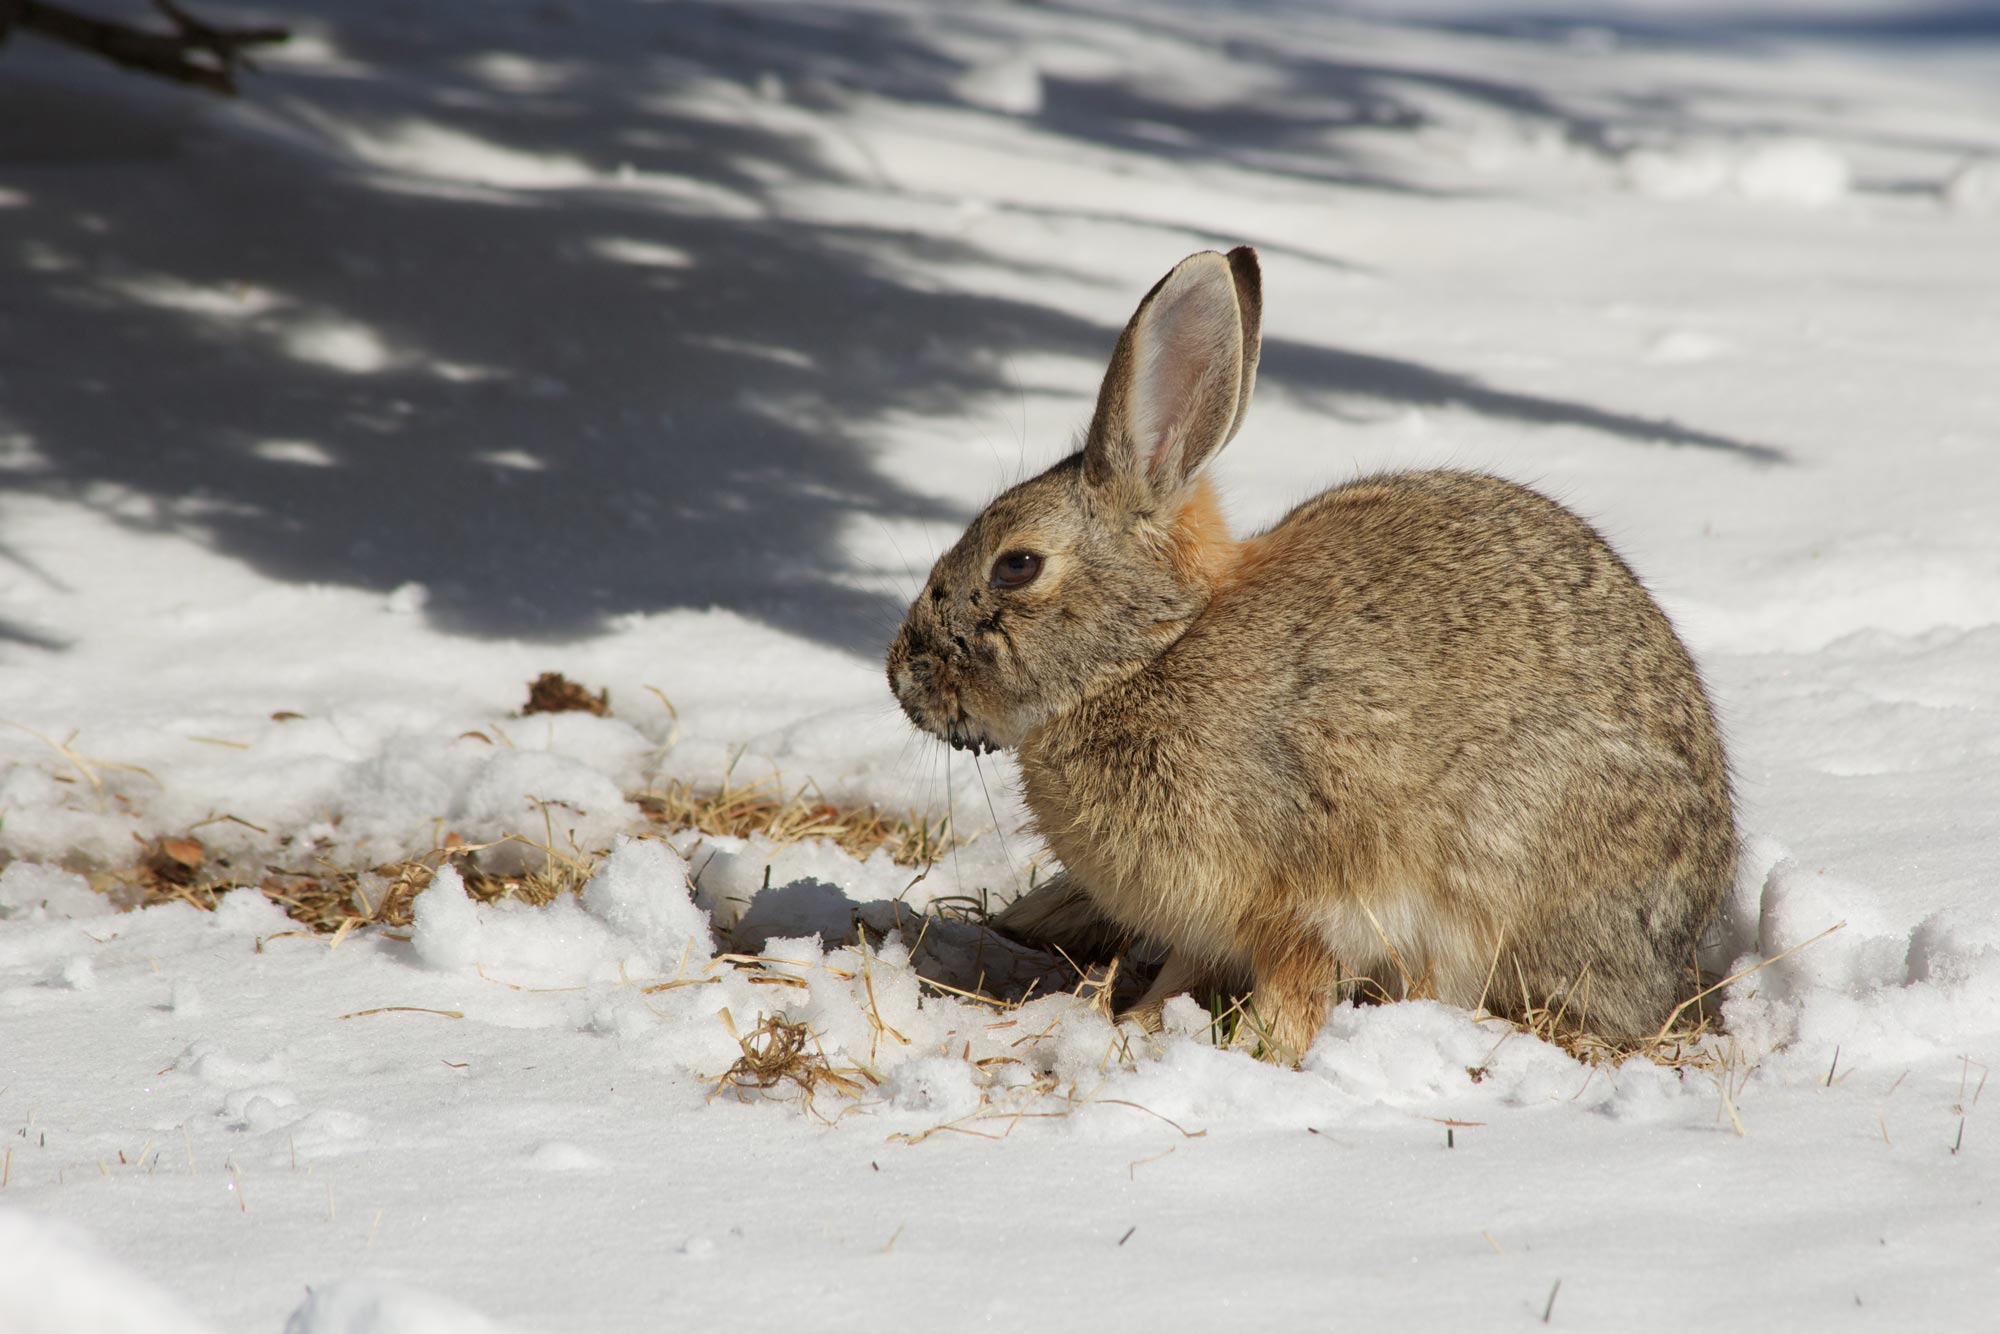 A rabbit in a snow-covered field.